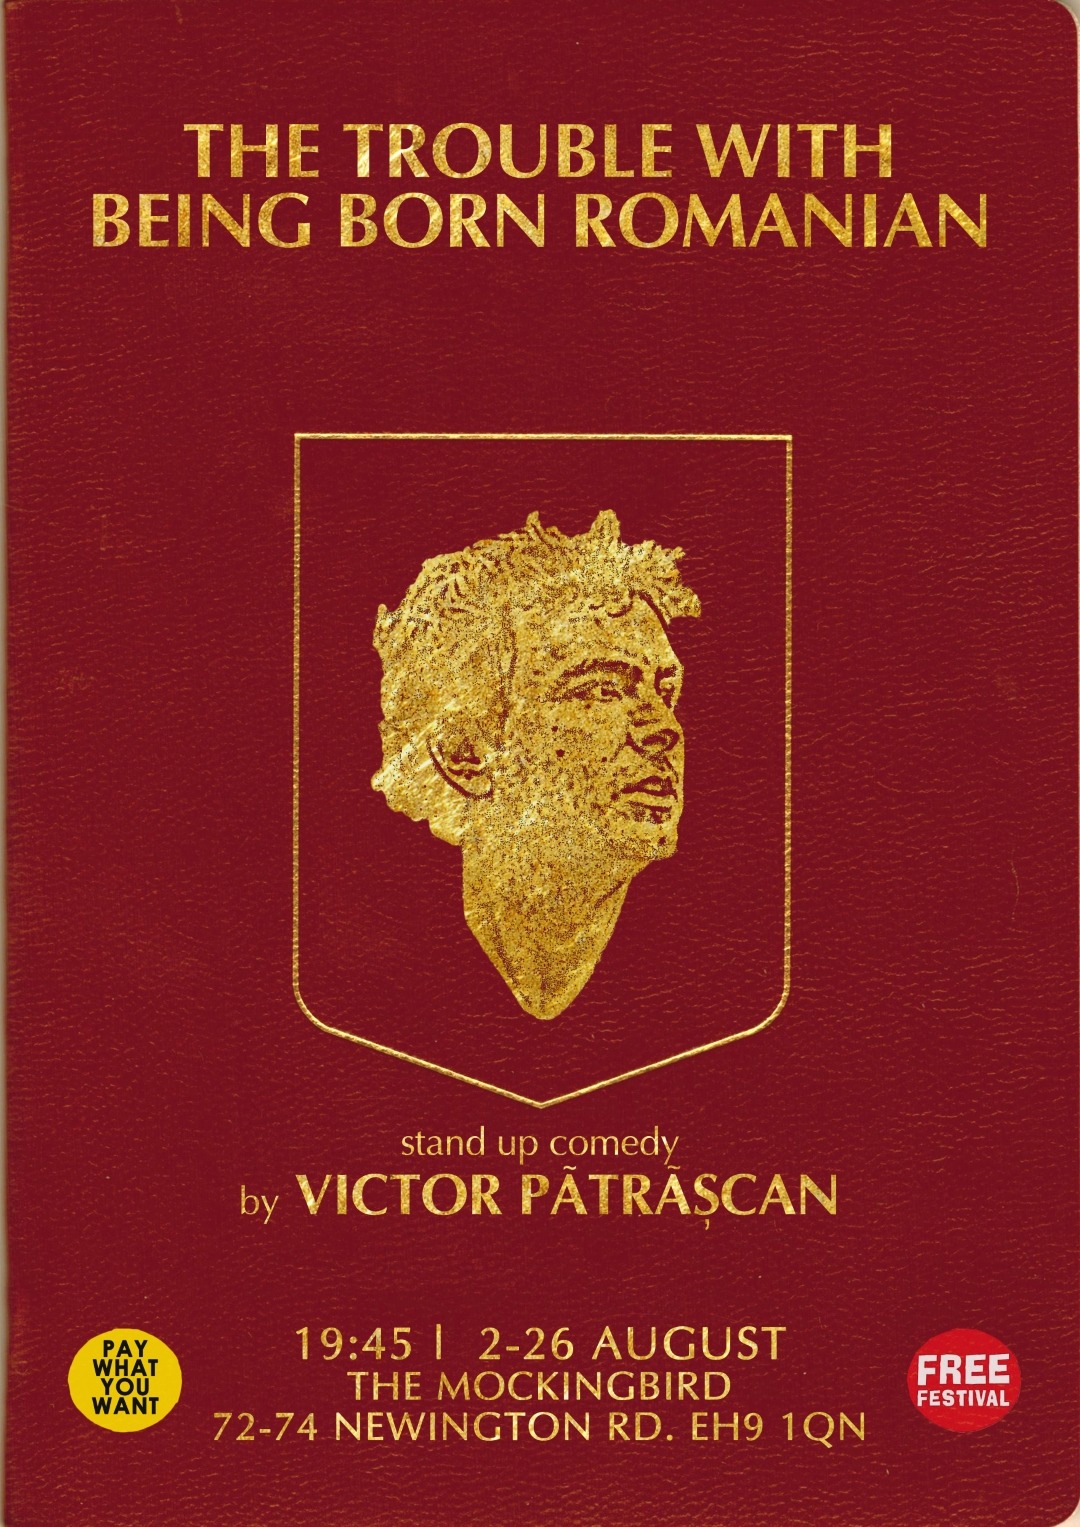 The poster for The Trouble With Being Born Romanian